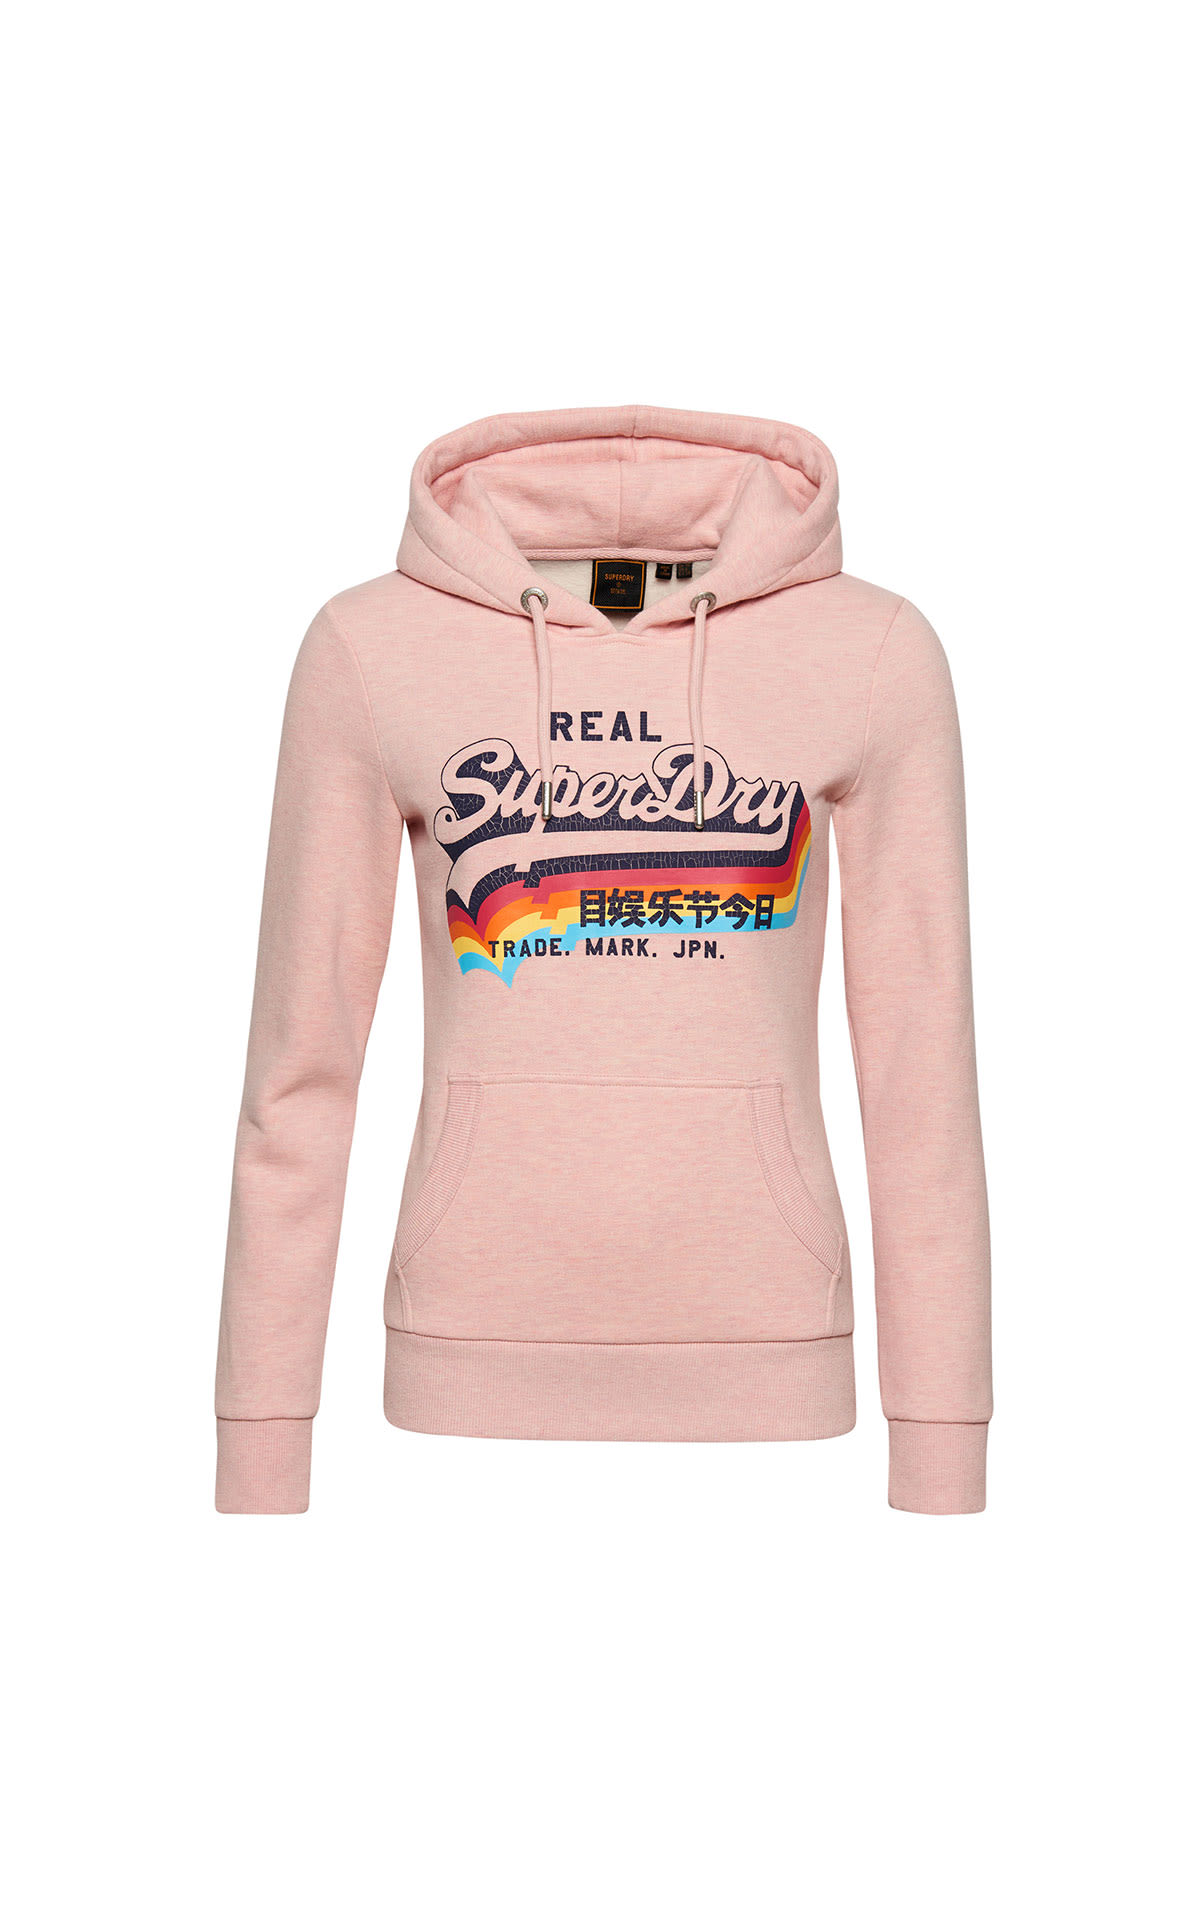 Superdry VL hood shell pink marl from Bicester Village